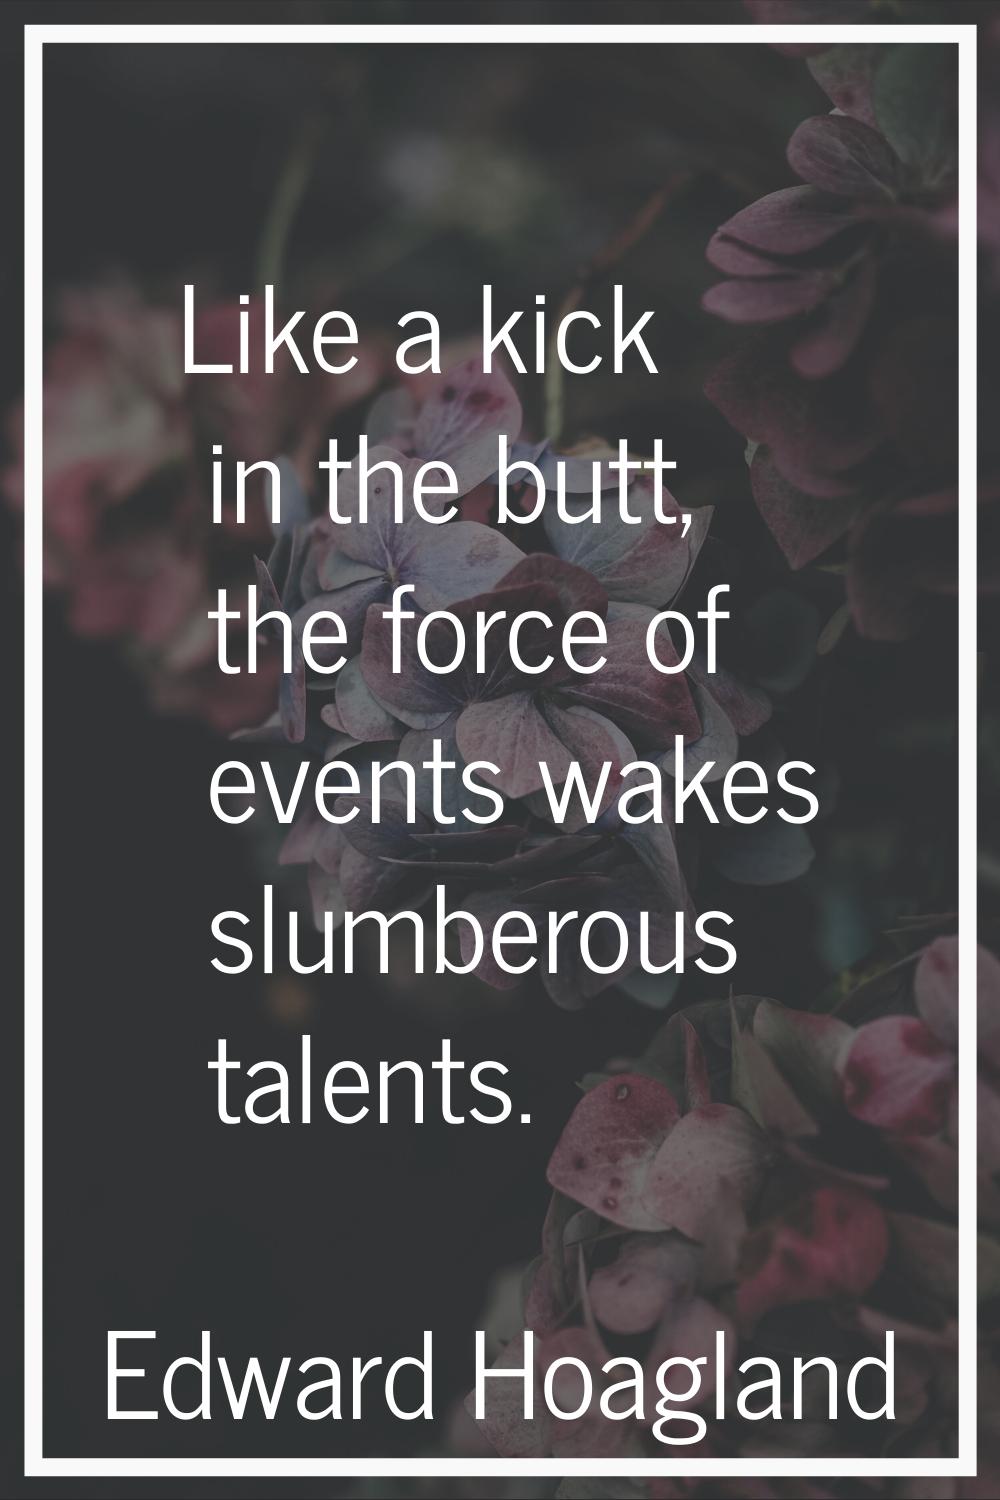 Like a kick in the butt, the force of events wakes slumberous talents.